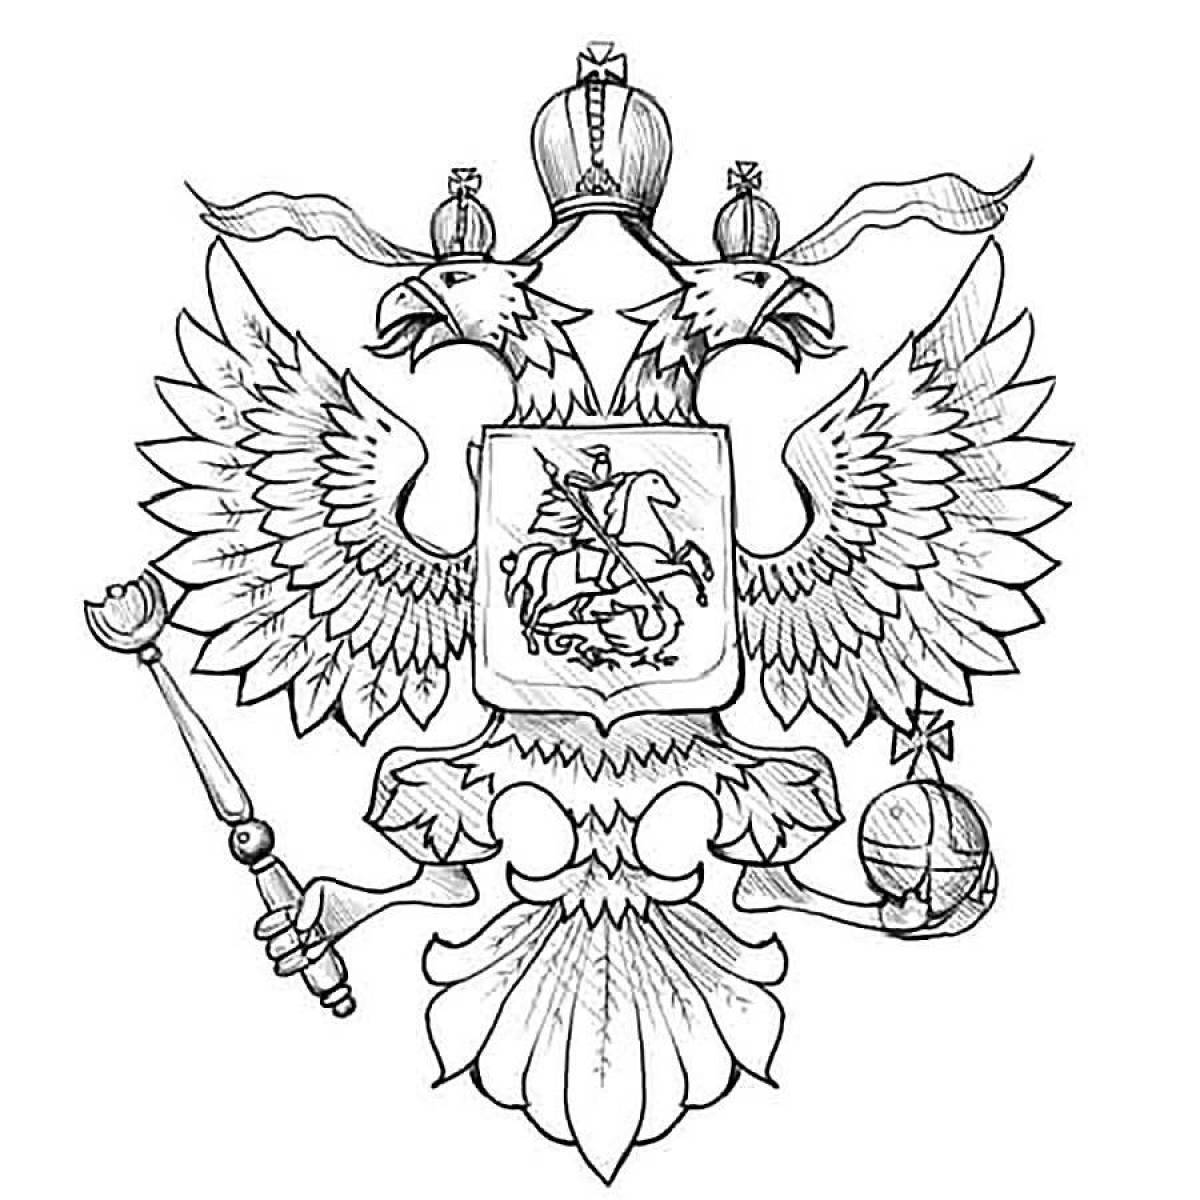 Coat of arms of Russia #18